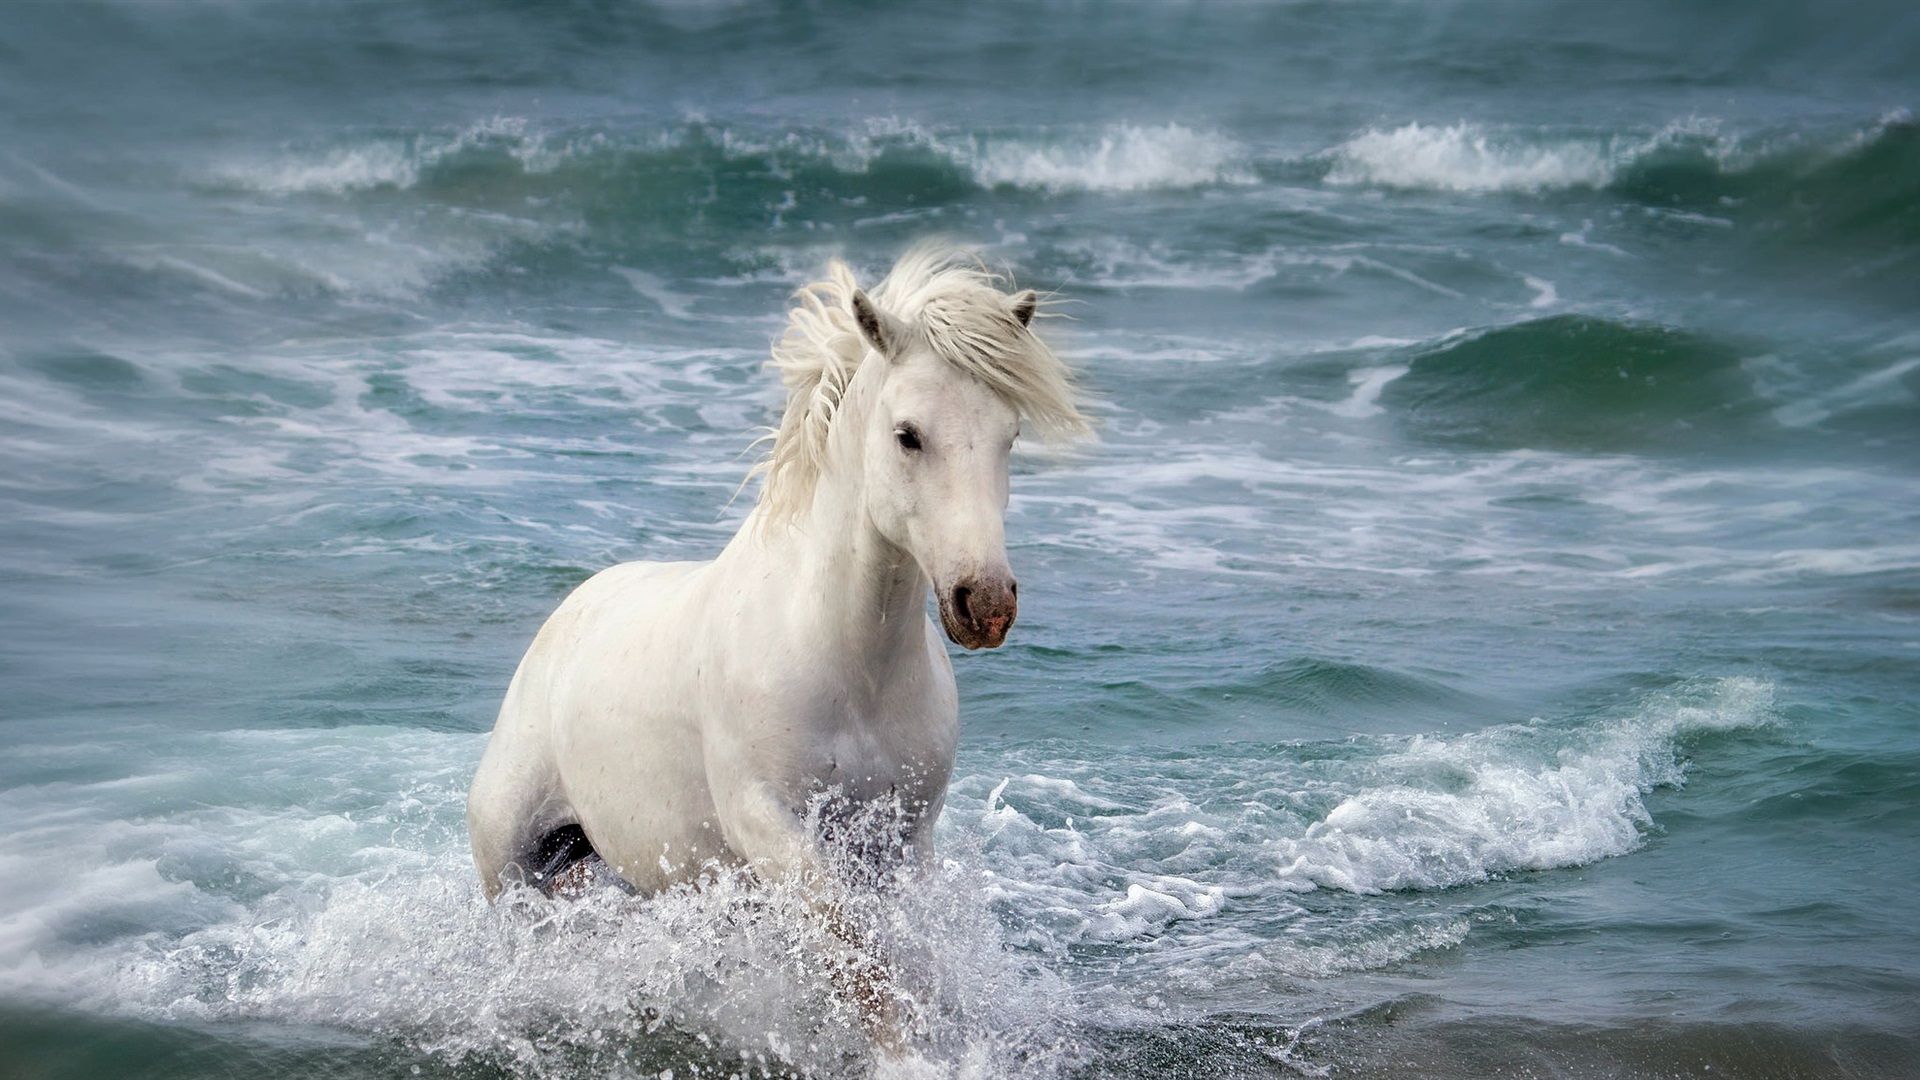 Wallpaper White Horse In The Sea, Waves In The Water